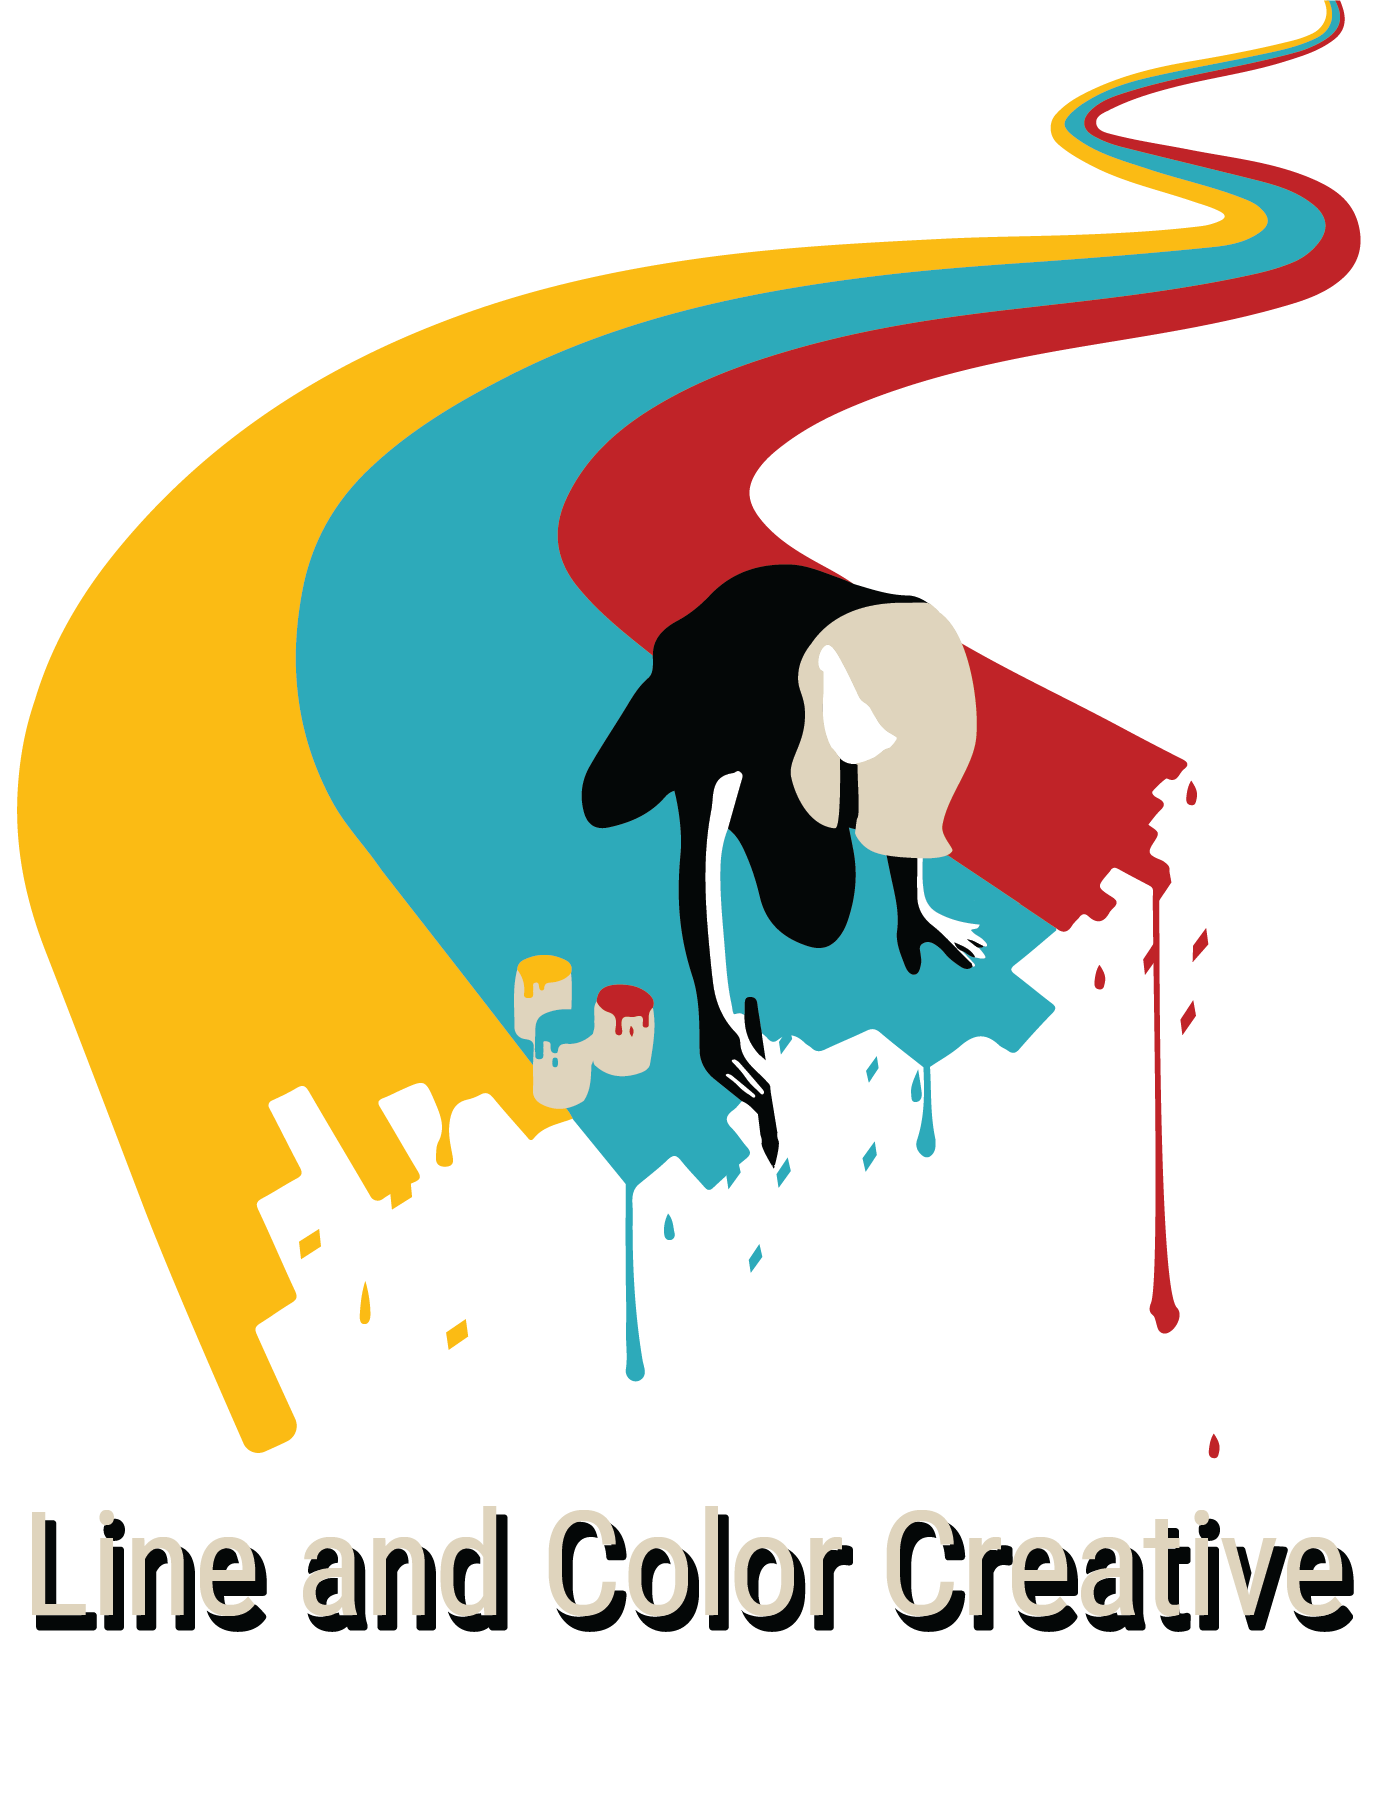 Line and Color Creative